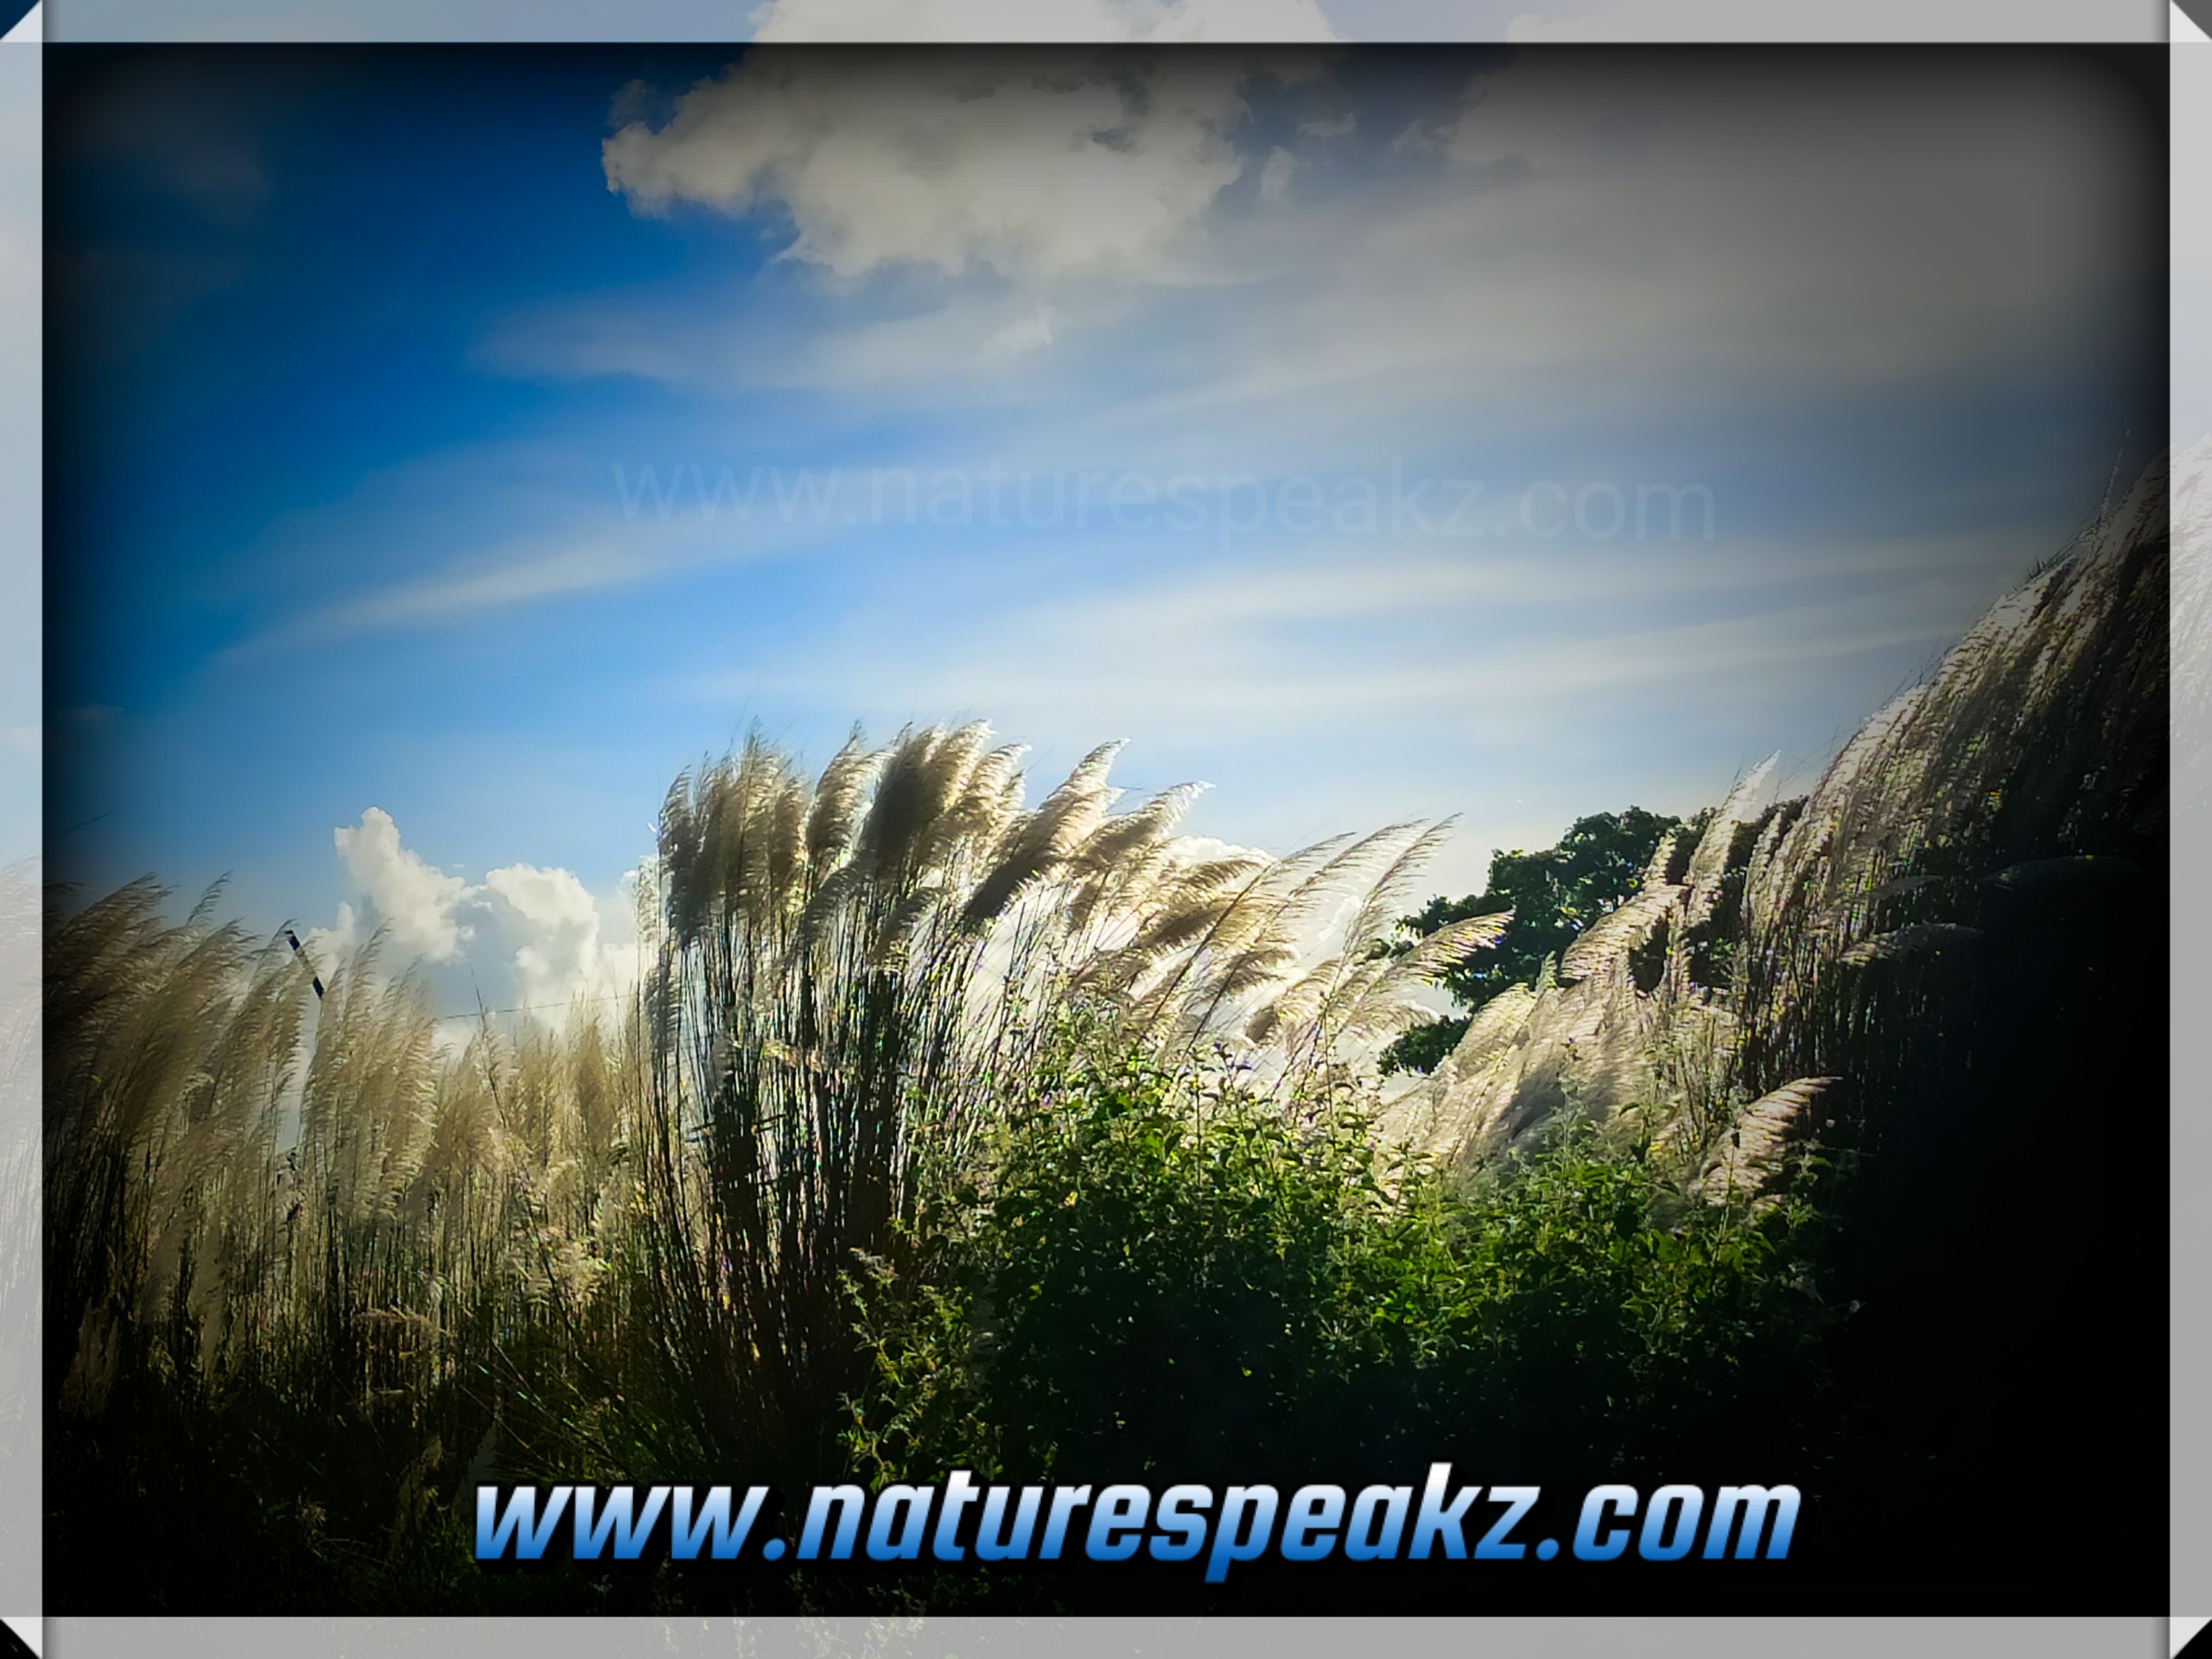 Facts about Kans Grass or Wild Sugarcane